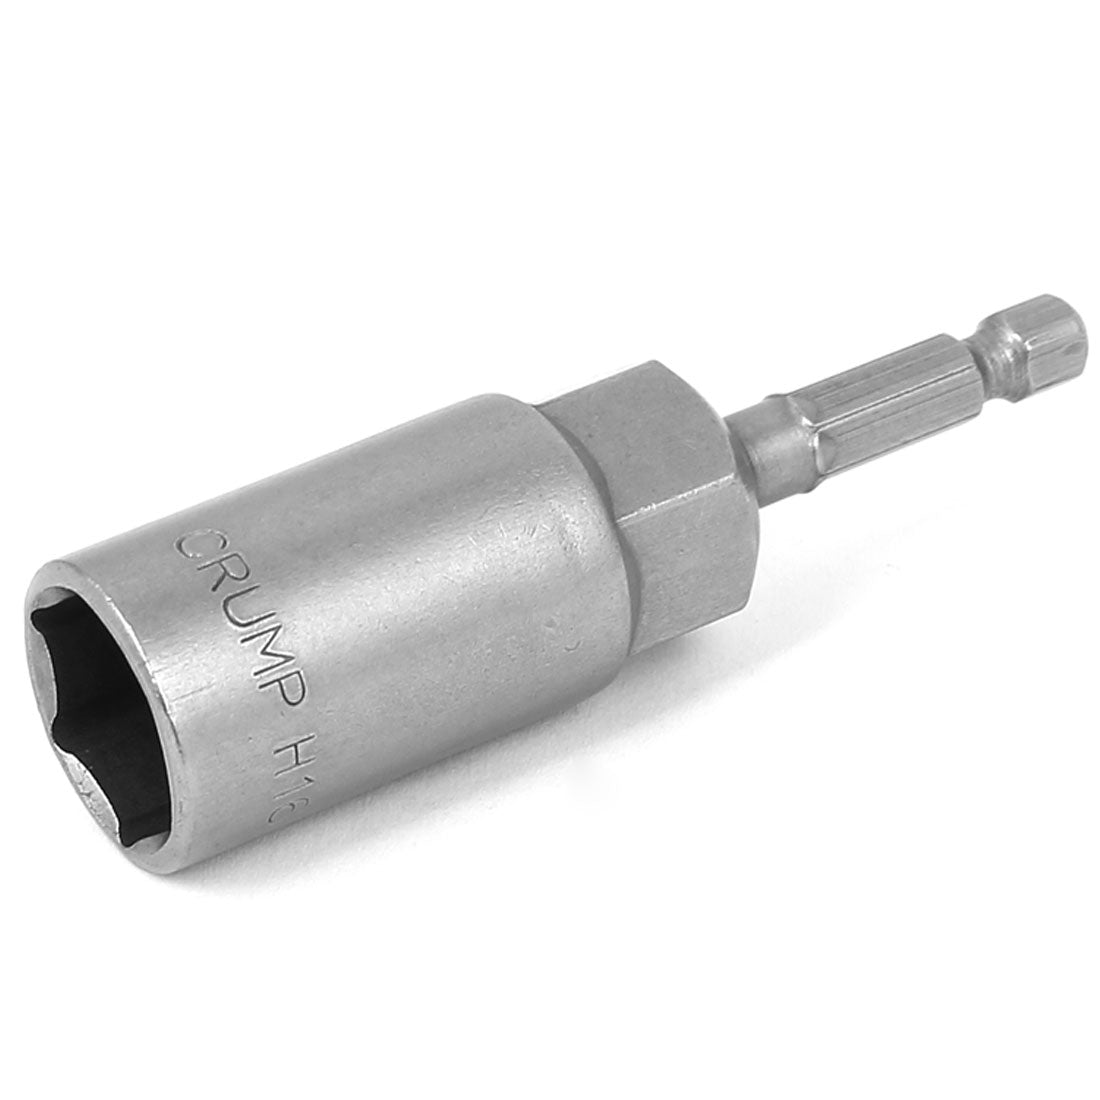 Uxcell Uxcell Metric 17mm Hex Socket Magnetic Nut Driver Set Adapter Drill Bit 150mm Long